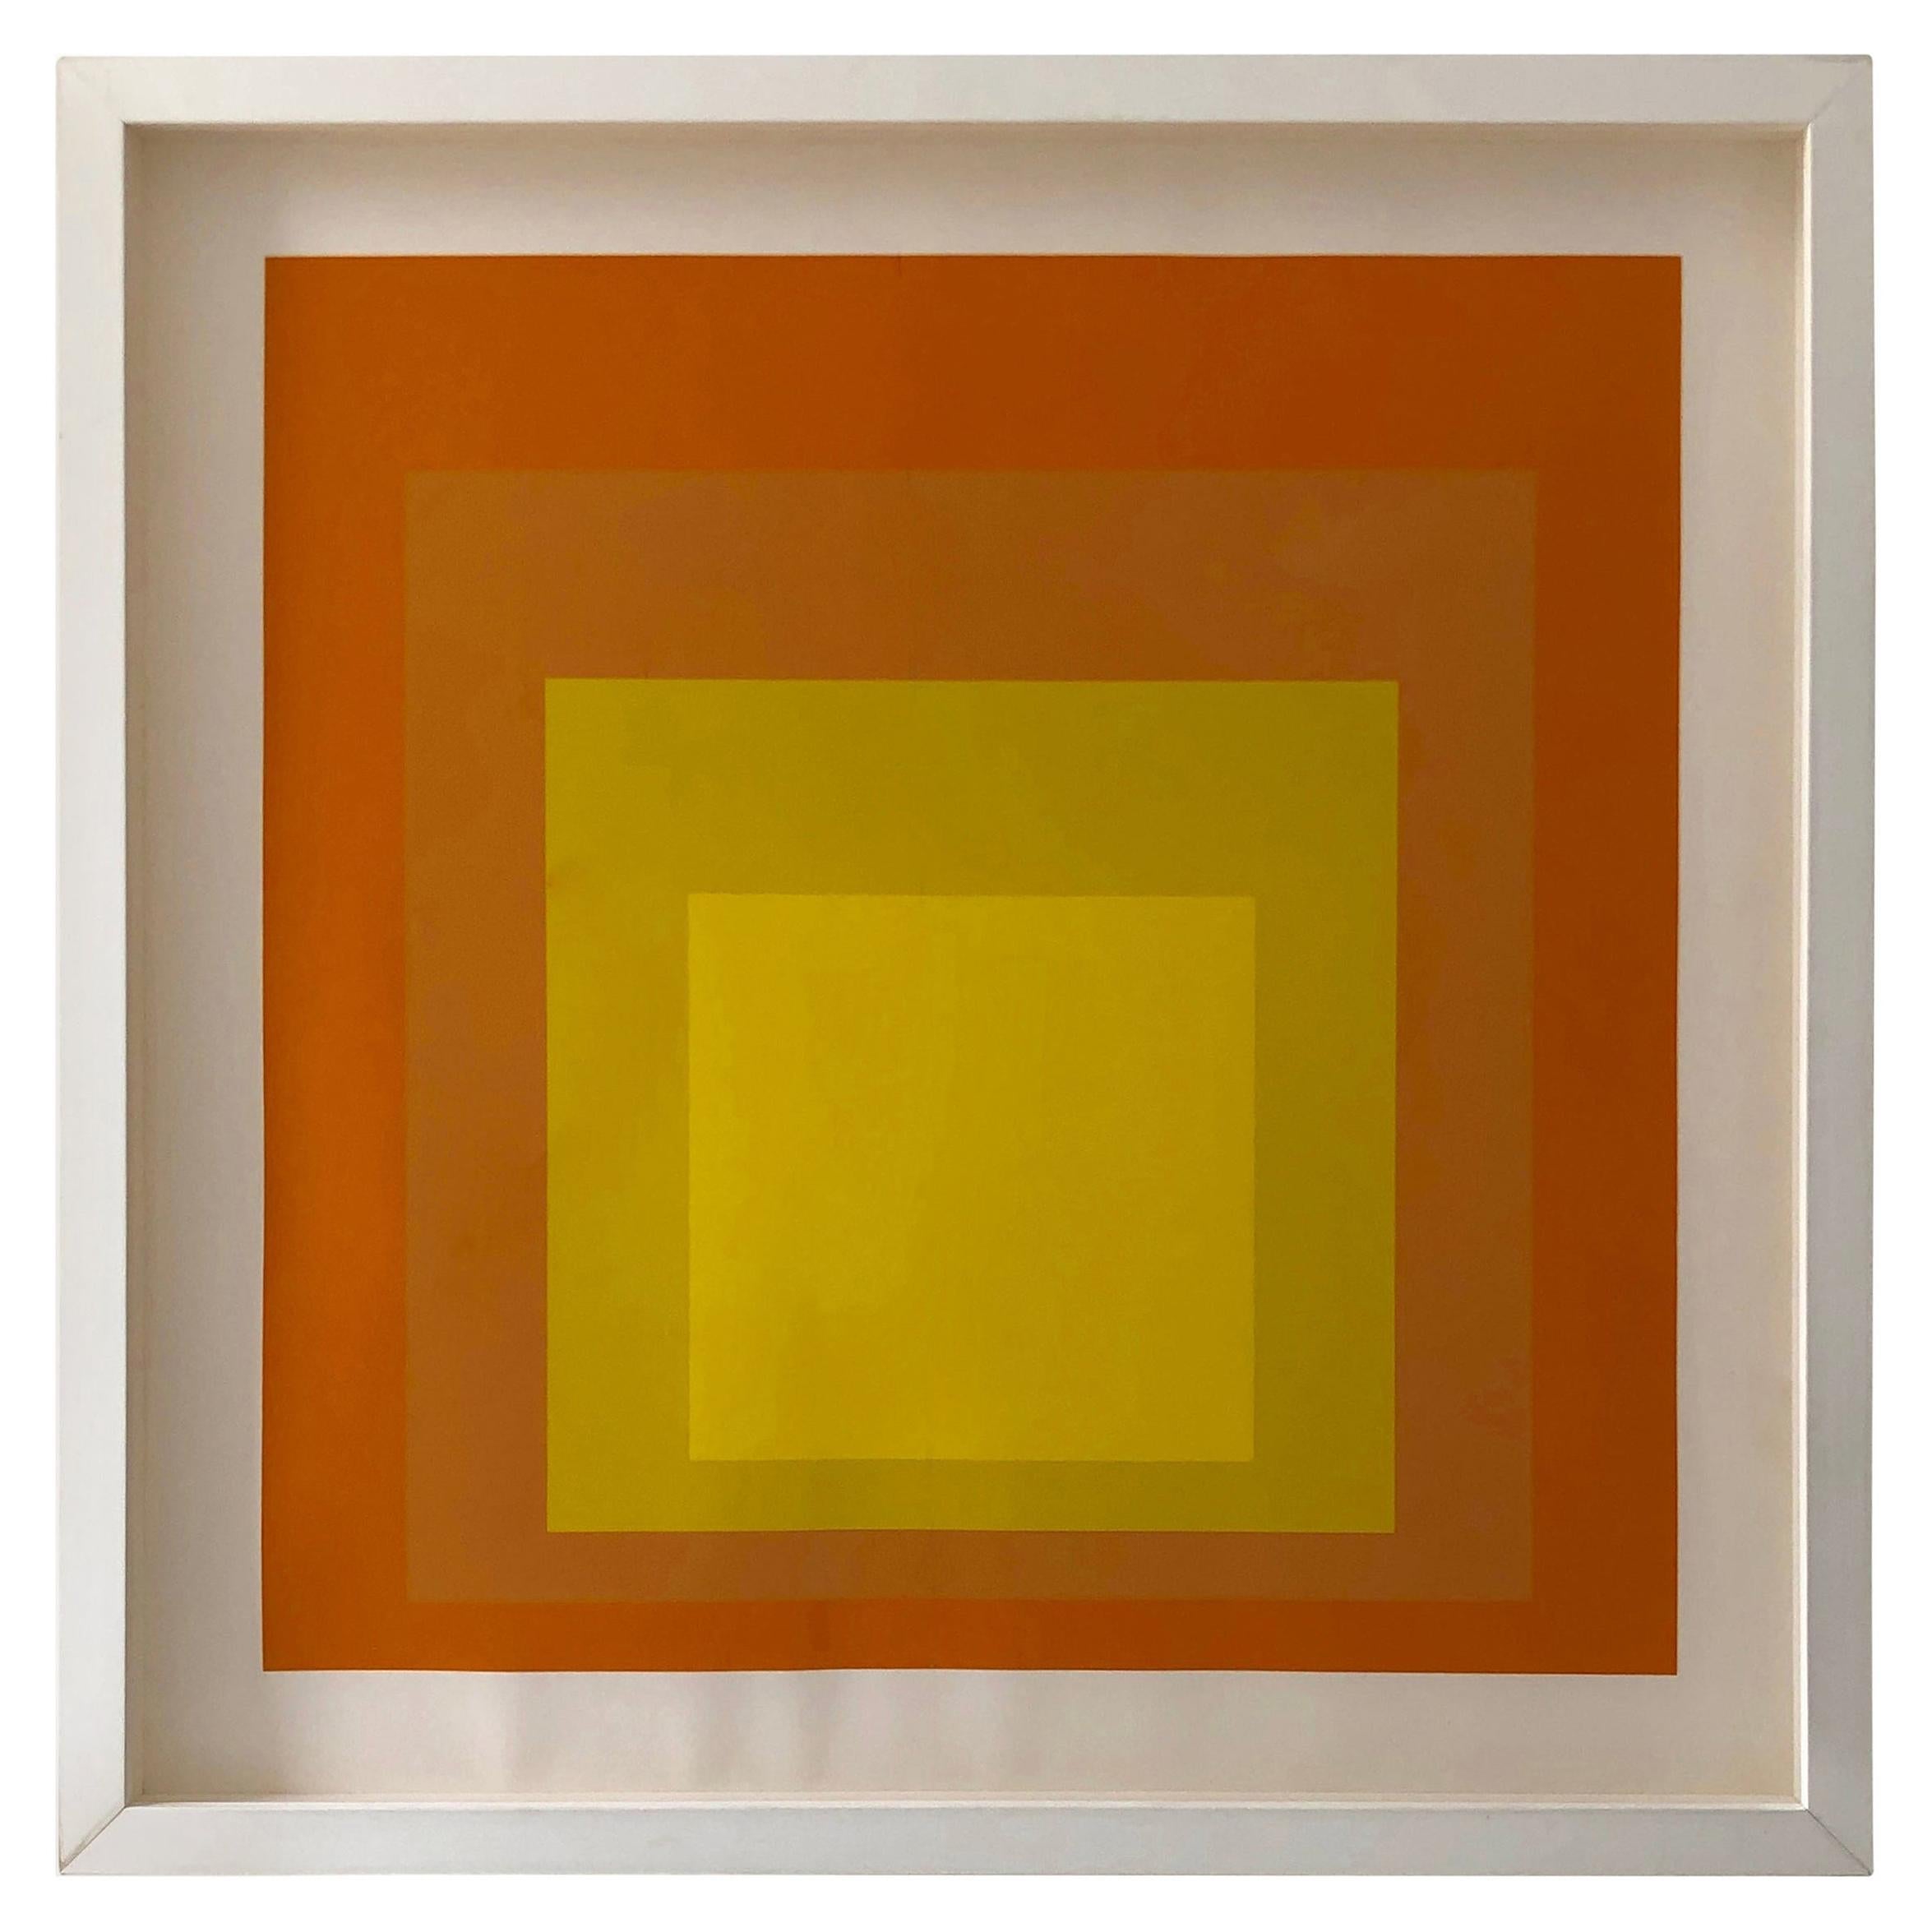 Albers Yellow and Oranges Silkscreen, Interaction of Color Homage to the Square